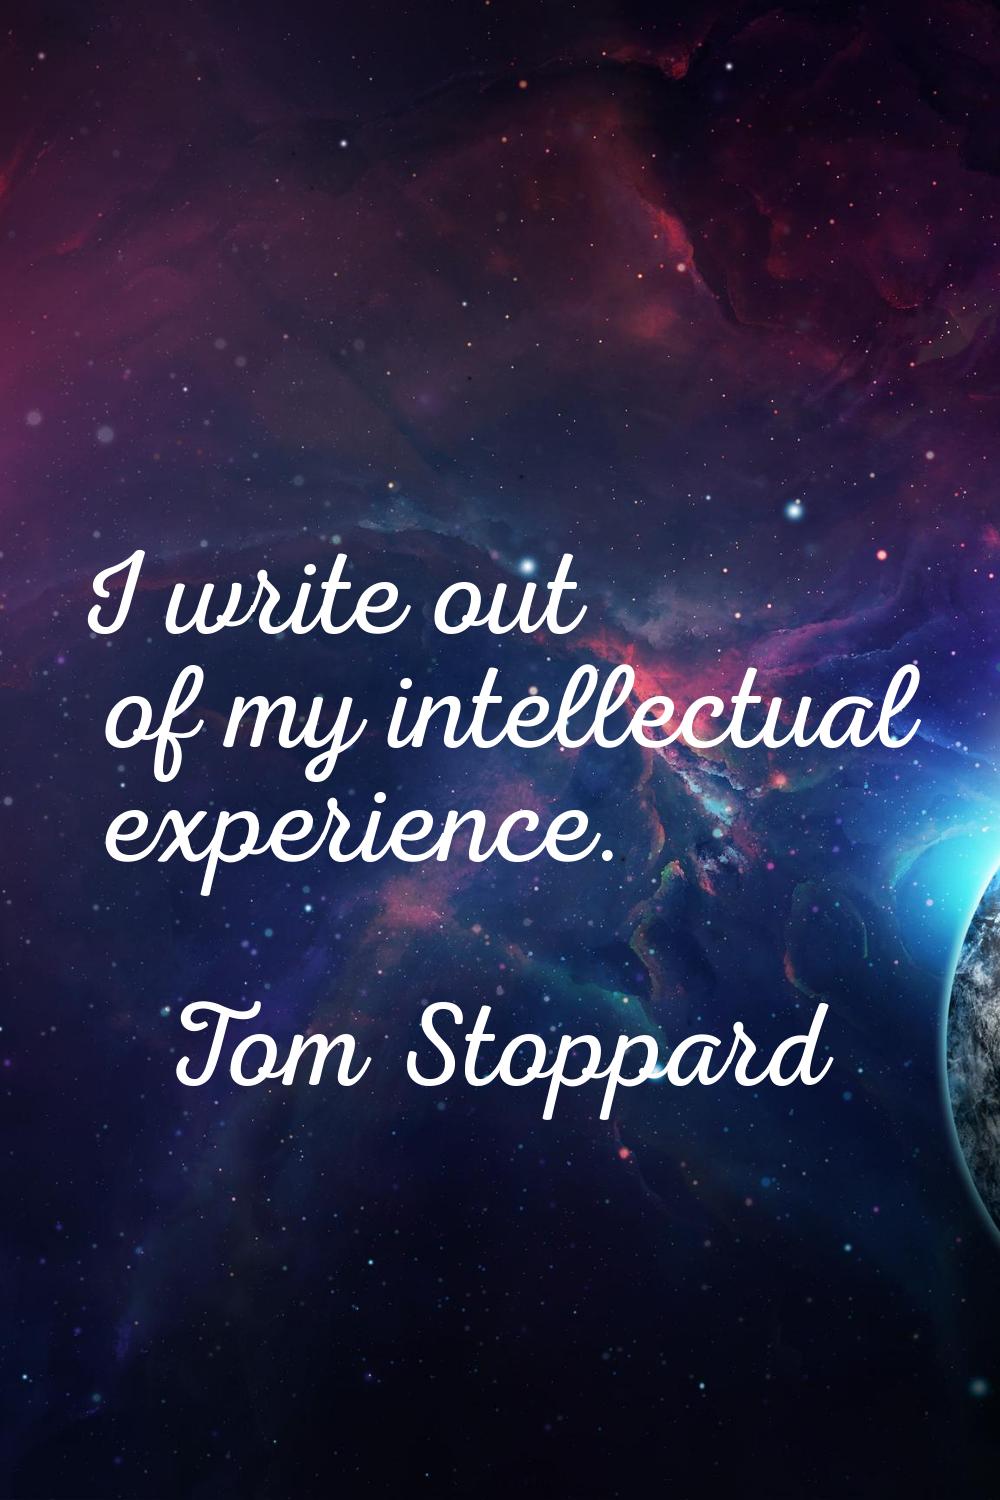 I write out of my intellectual experience.